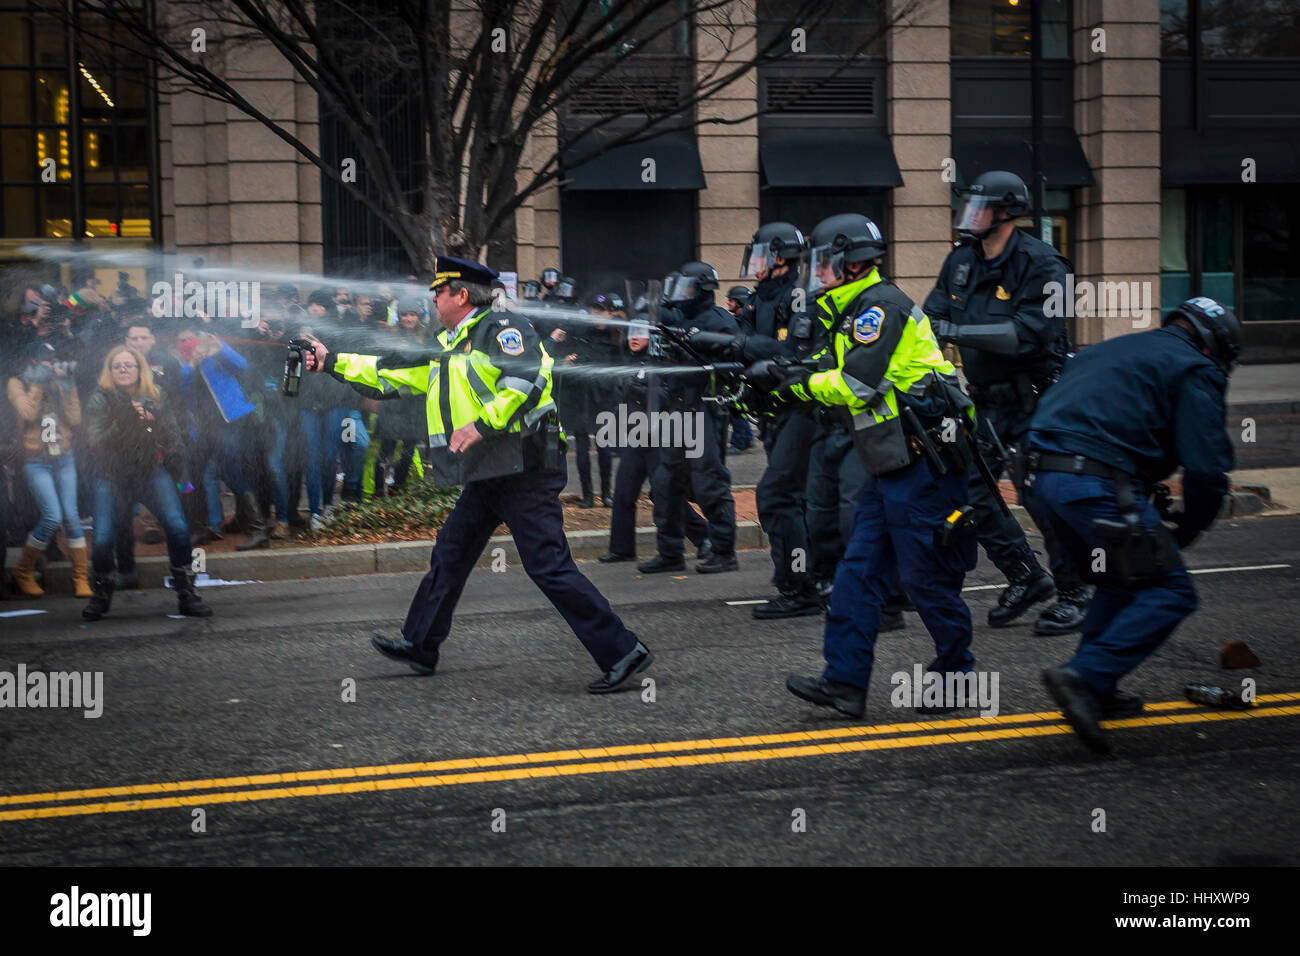 Washington, USA. 20th Jan, 2017. Hours after Donald Trump was inaugurated as the 45th President of the United States, On January, 20, 2017, protesters clashed with riot police, who responded with pepper spray, tear gas, rubber bullets and flash grenades. Credit: PACIFIC PRESS/Alamy Live News Stock Photo